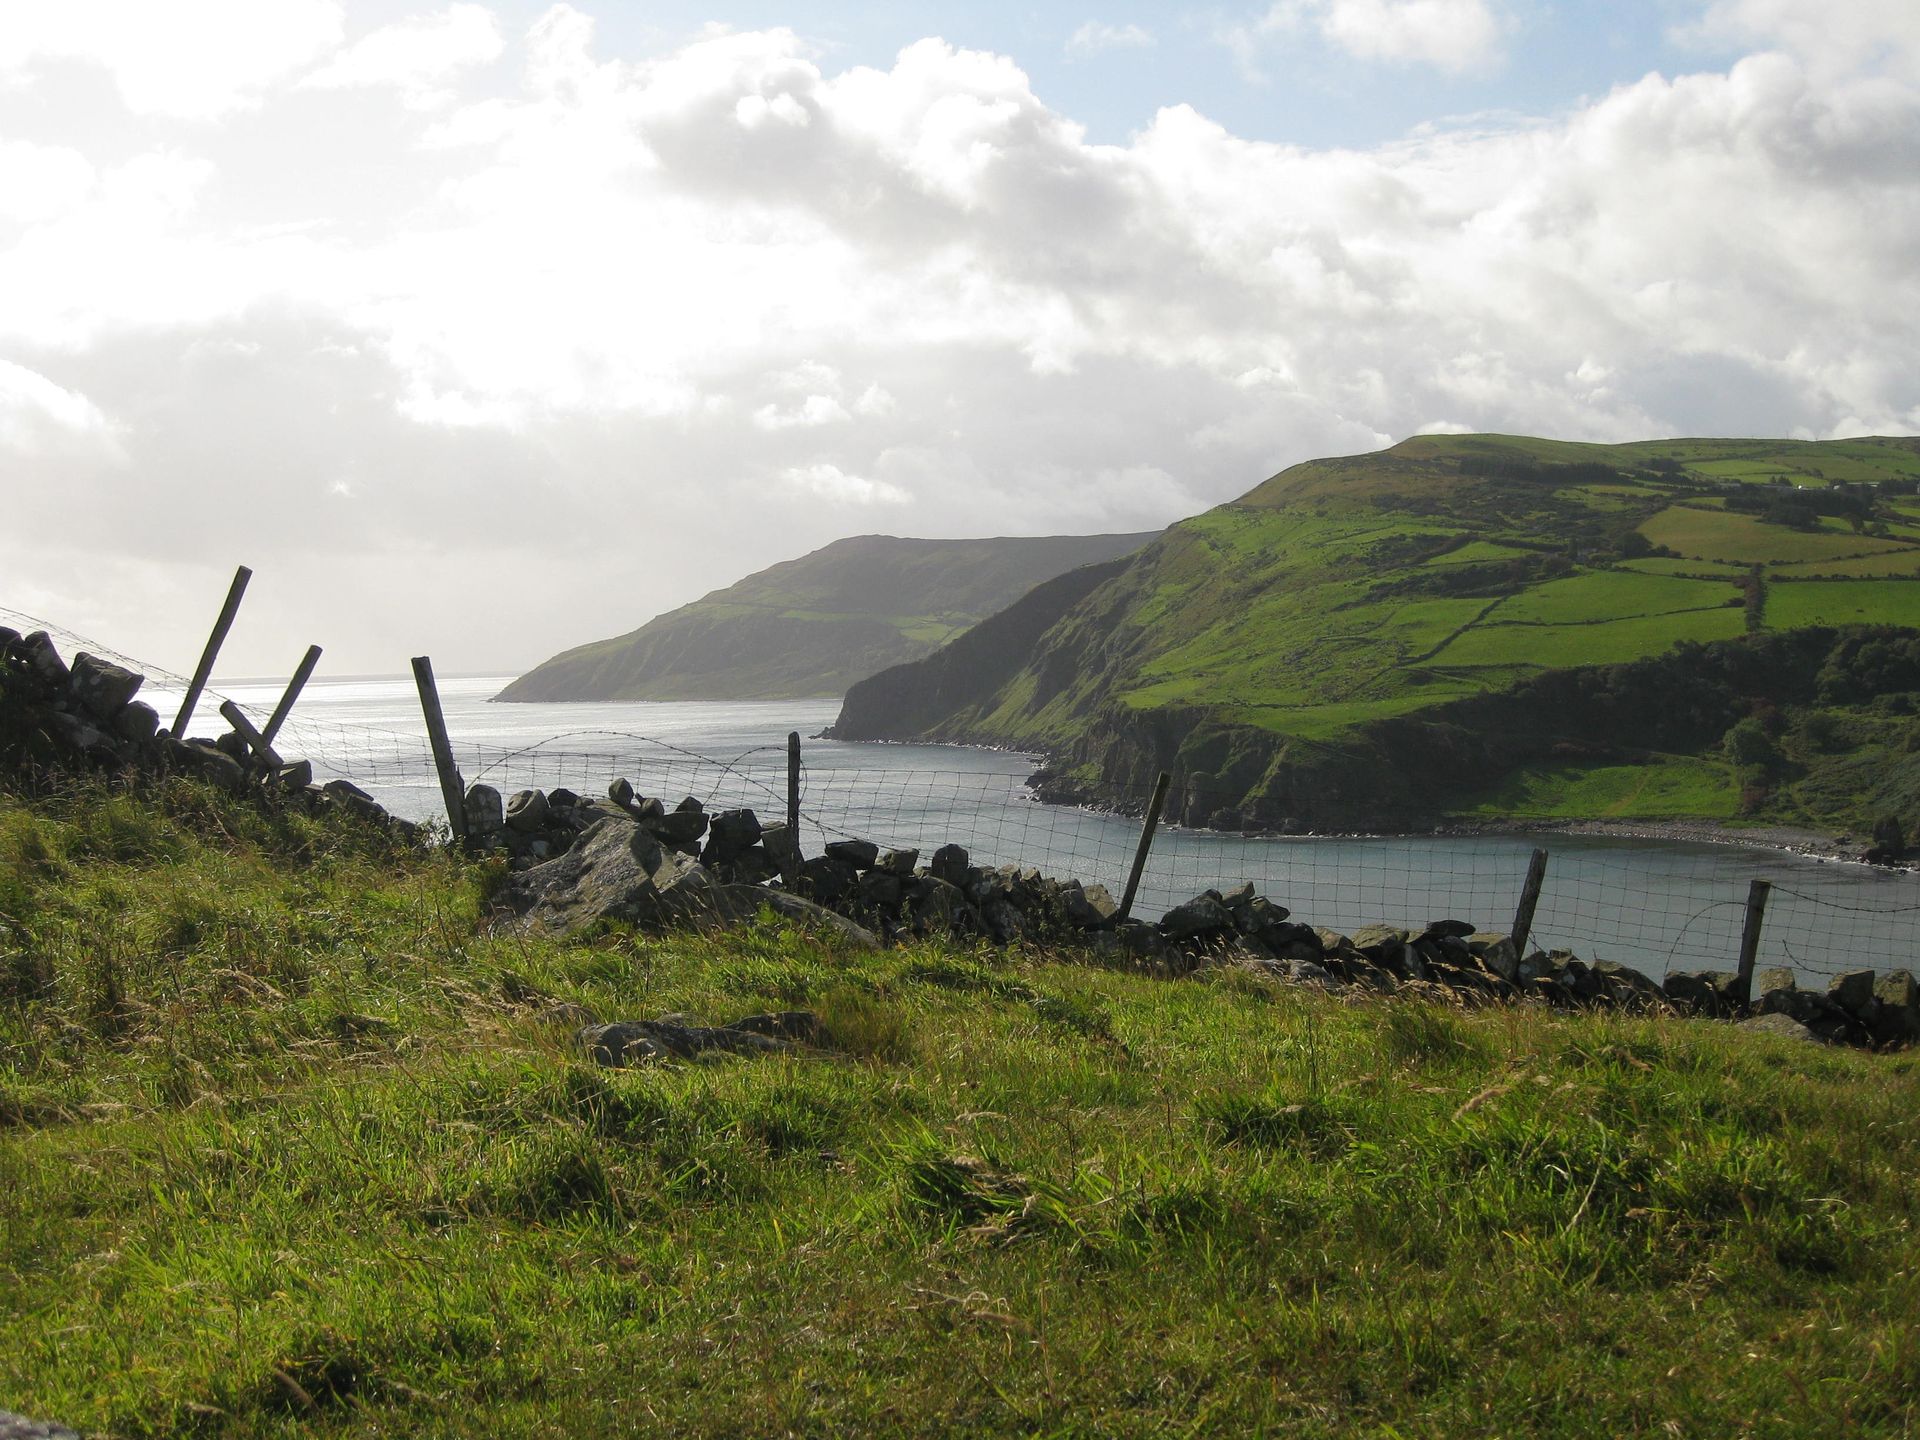 Ireland coastline with green cliffs coming down into the water.